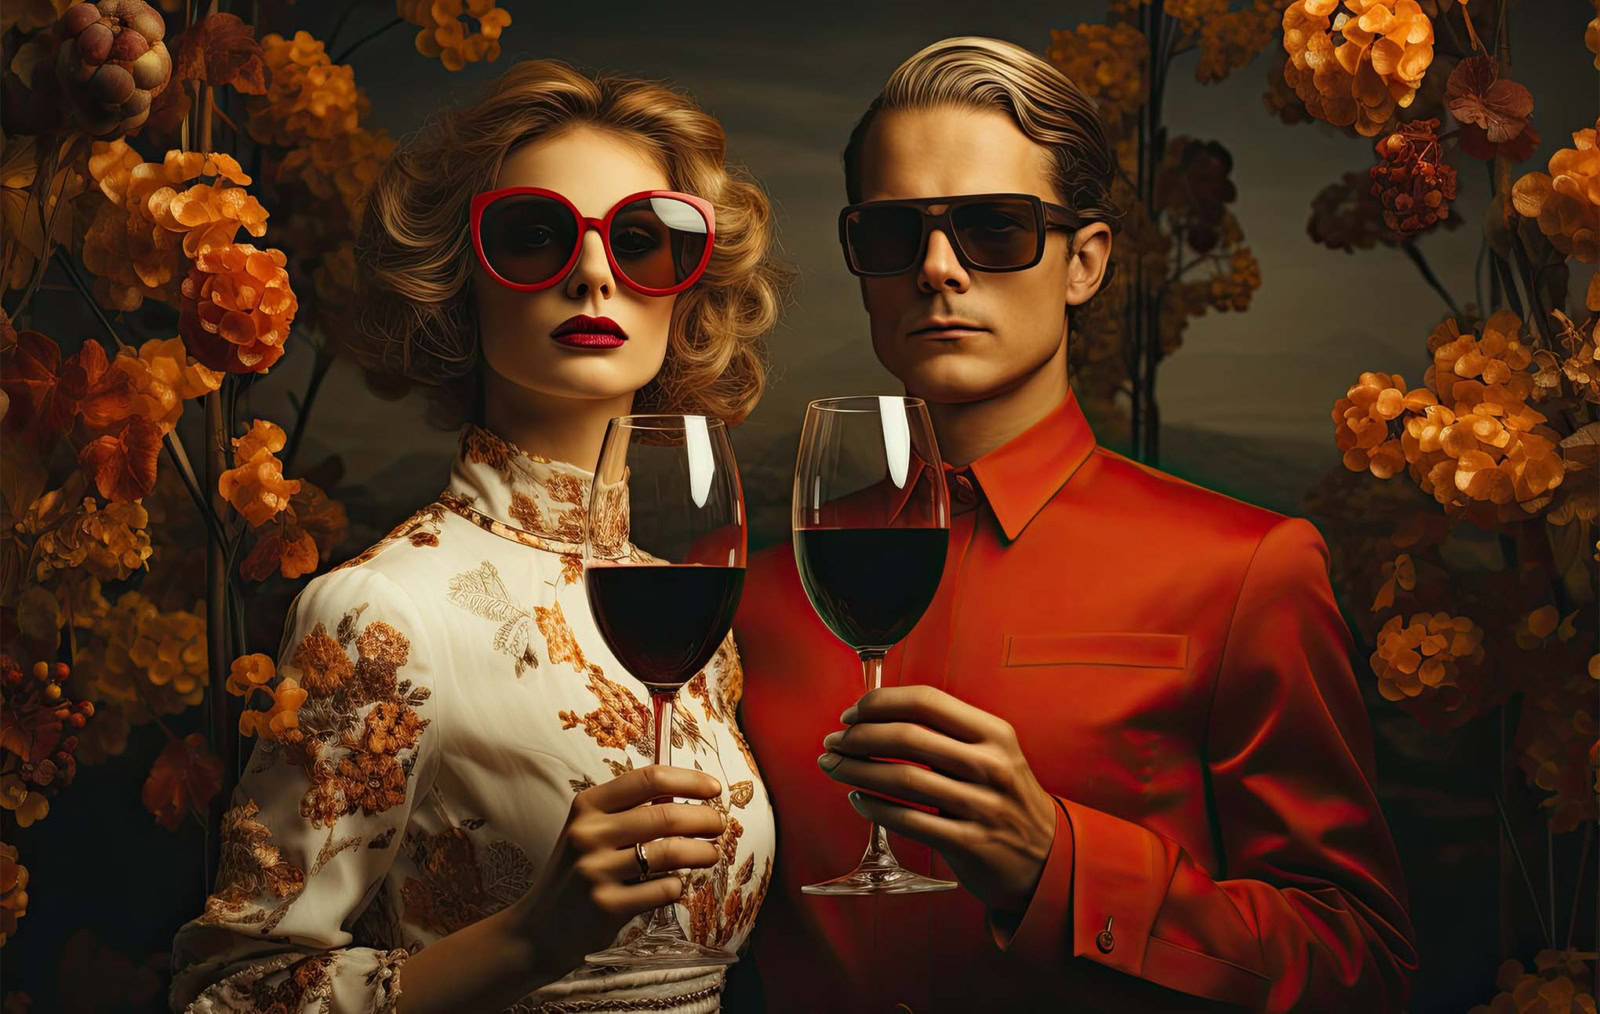 A stylish couple in vintage attire, holding wine glasses from the best wine marketing agency, against a floral backdrop. The woman wears large sunglasses; the man dons a sharp suit.